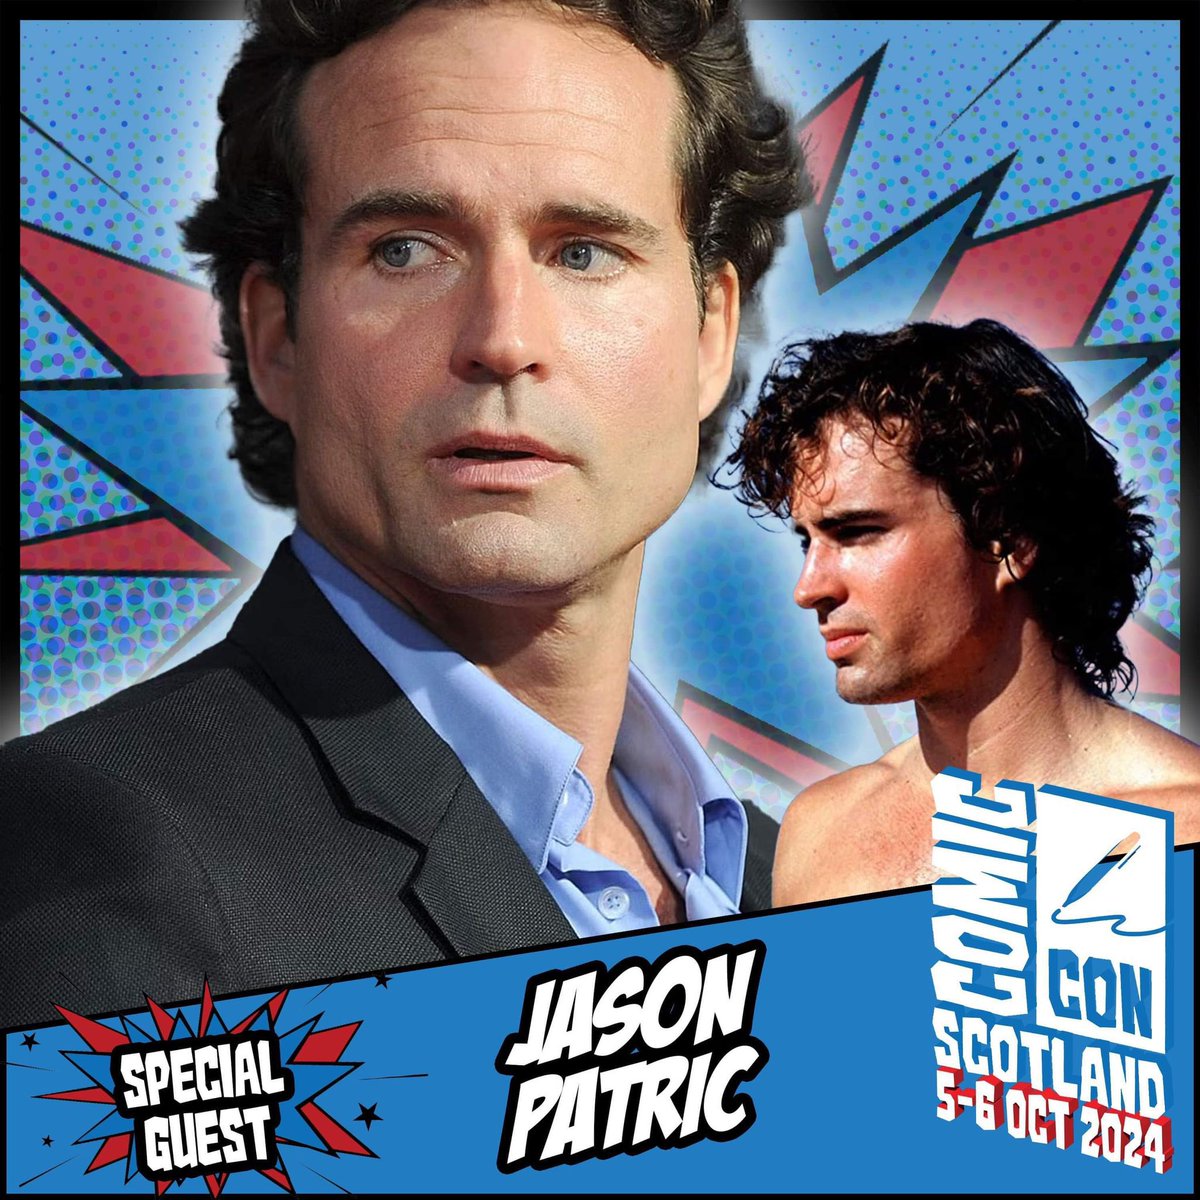 Comic Con Scotland welcomes Jason Patric, known for projects such as The Lost Boys, My Sisters Keeper, The Outsider and many more. Appearing 5-6 October! Tickets: comicconventionscotland.co.uk